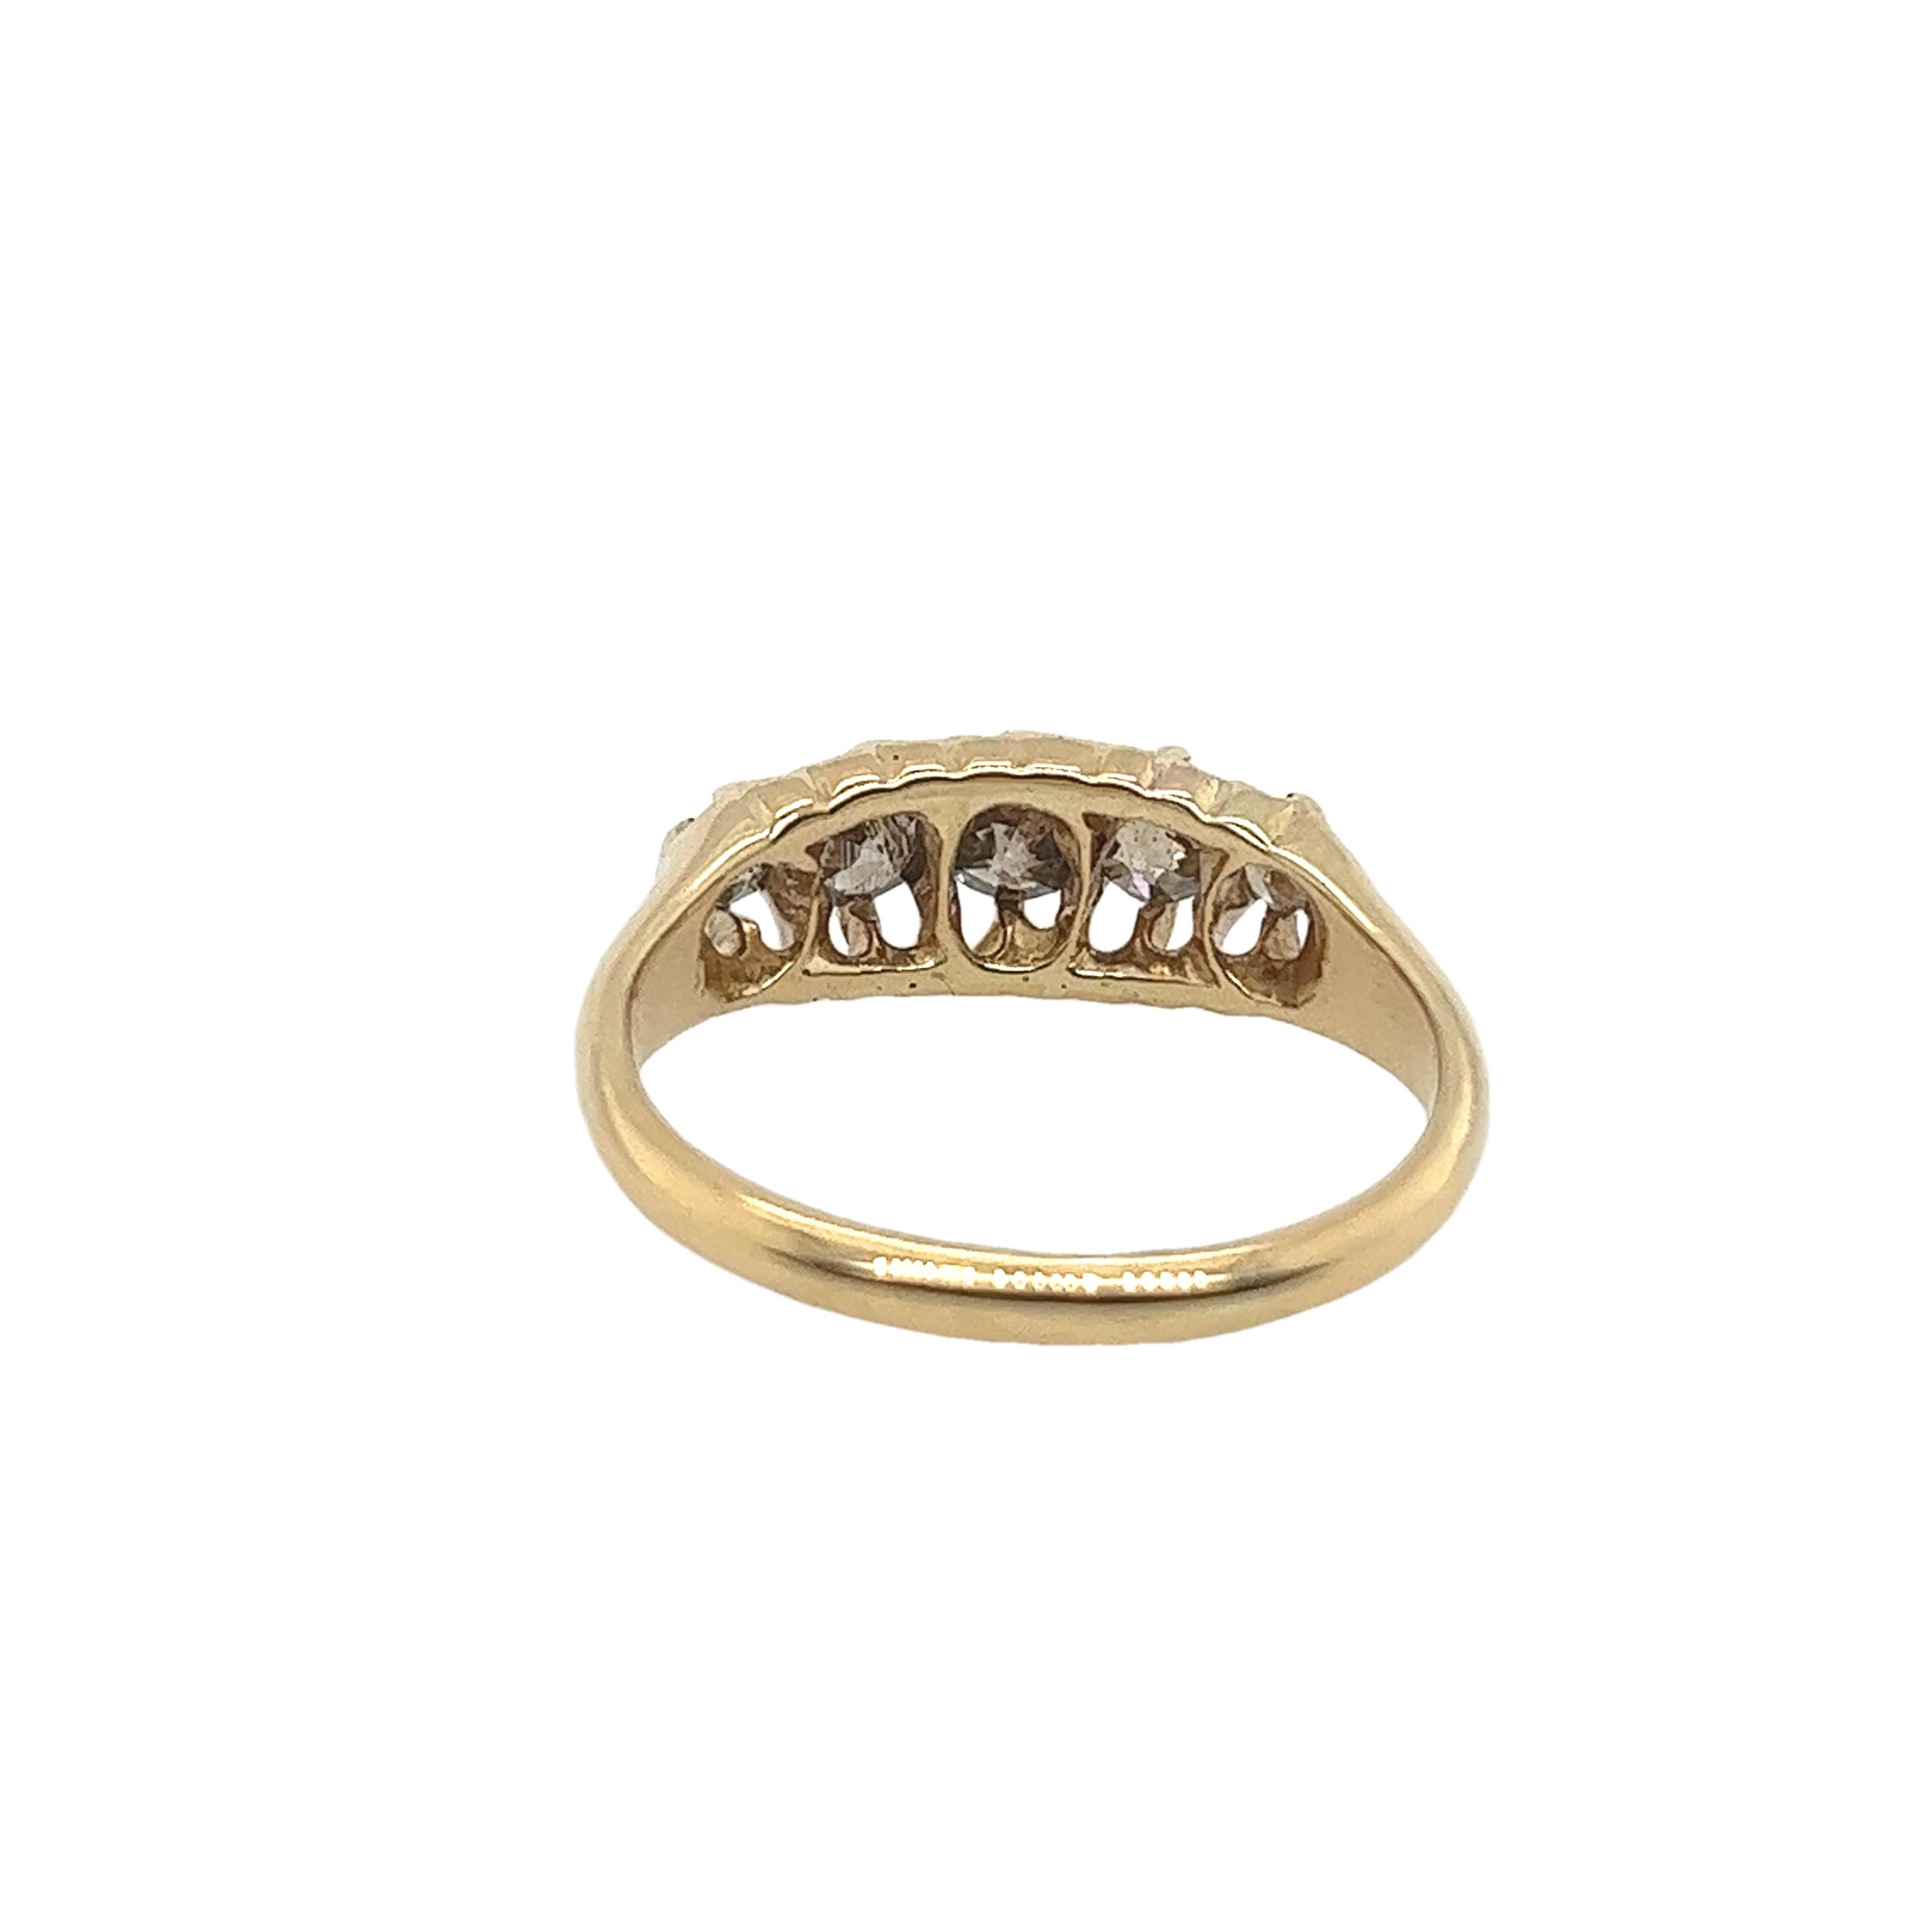 An elegant pre 1950's 5-stone diamond ring, set with 5 round brown diamonds, in an 18ct yellow gold setting.

Total Diamond Weight: 0.40ct
Diamond Colour: brown
Diamond Clarity: SI1
Width of Band: 1.95mm
Width of Head: 6.11mm
Length of Head: